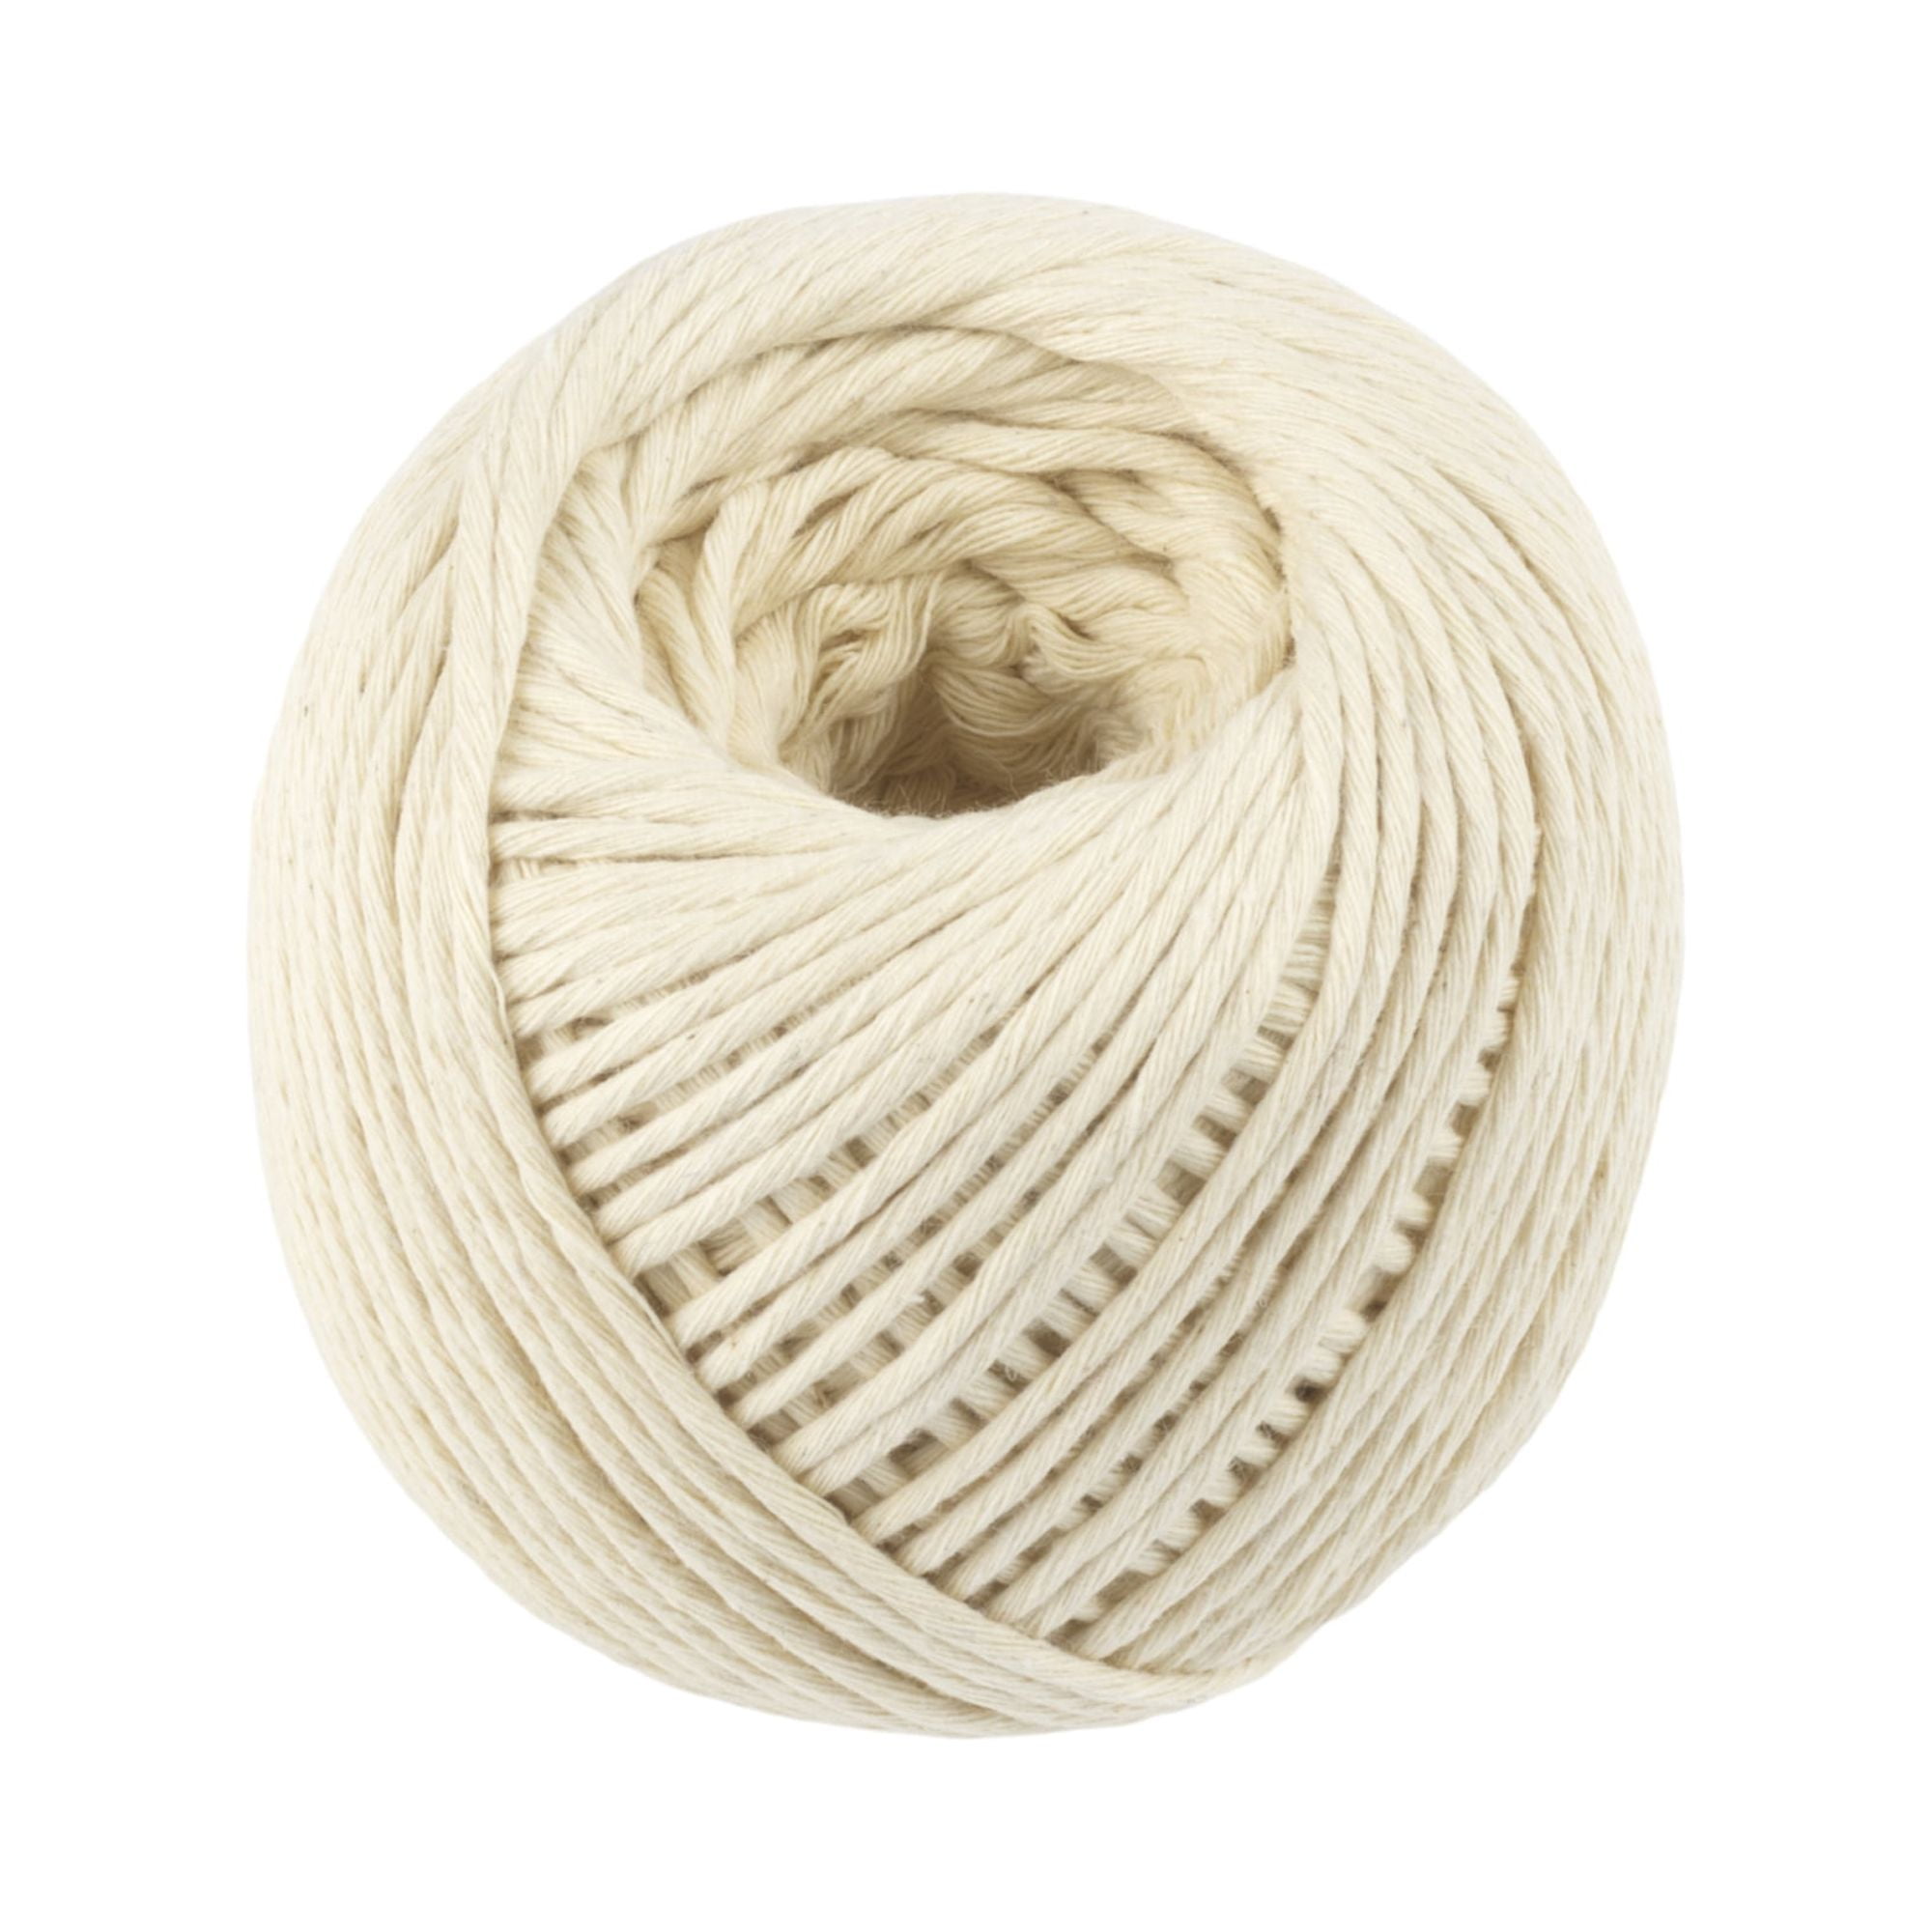 GoodCook Natural Cotton Cooking and Crafting Twine Ball - 300 ft